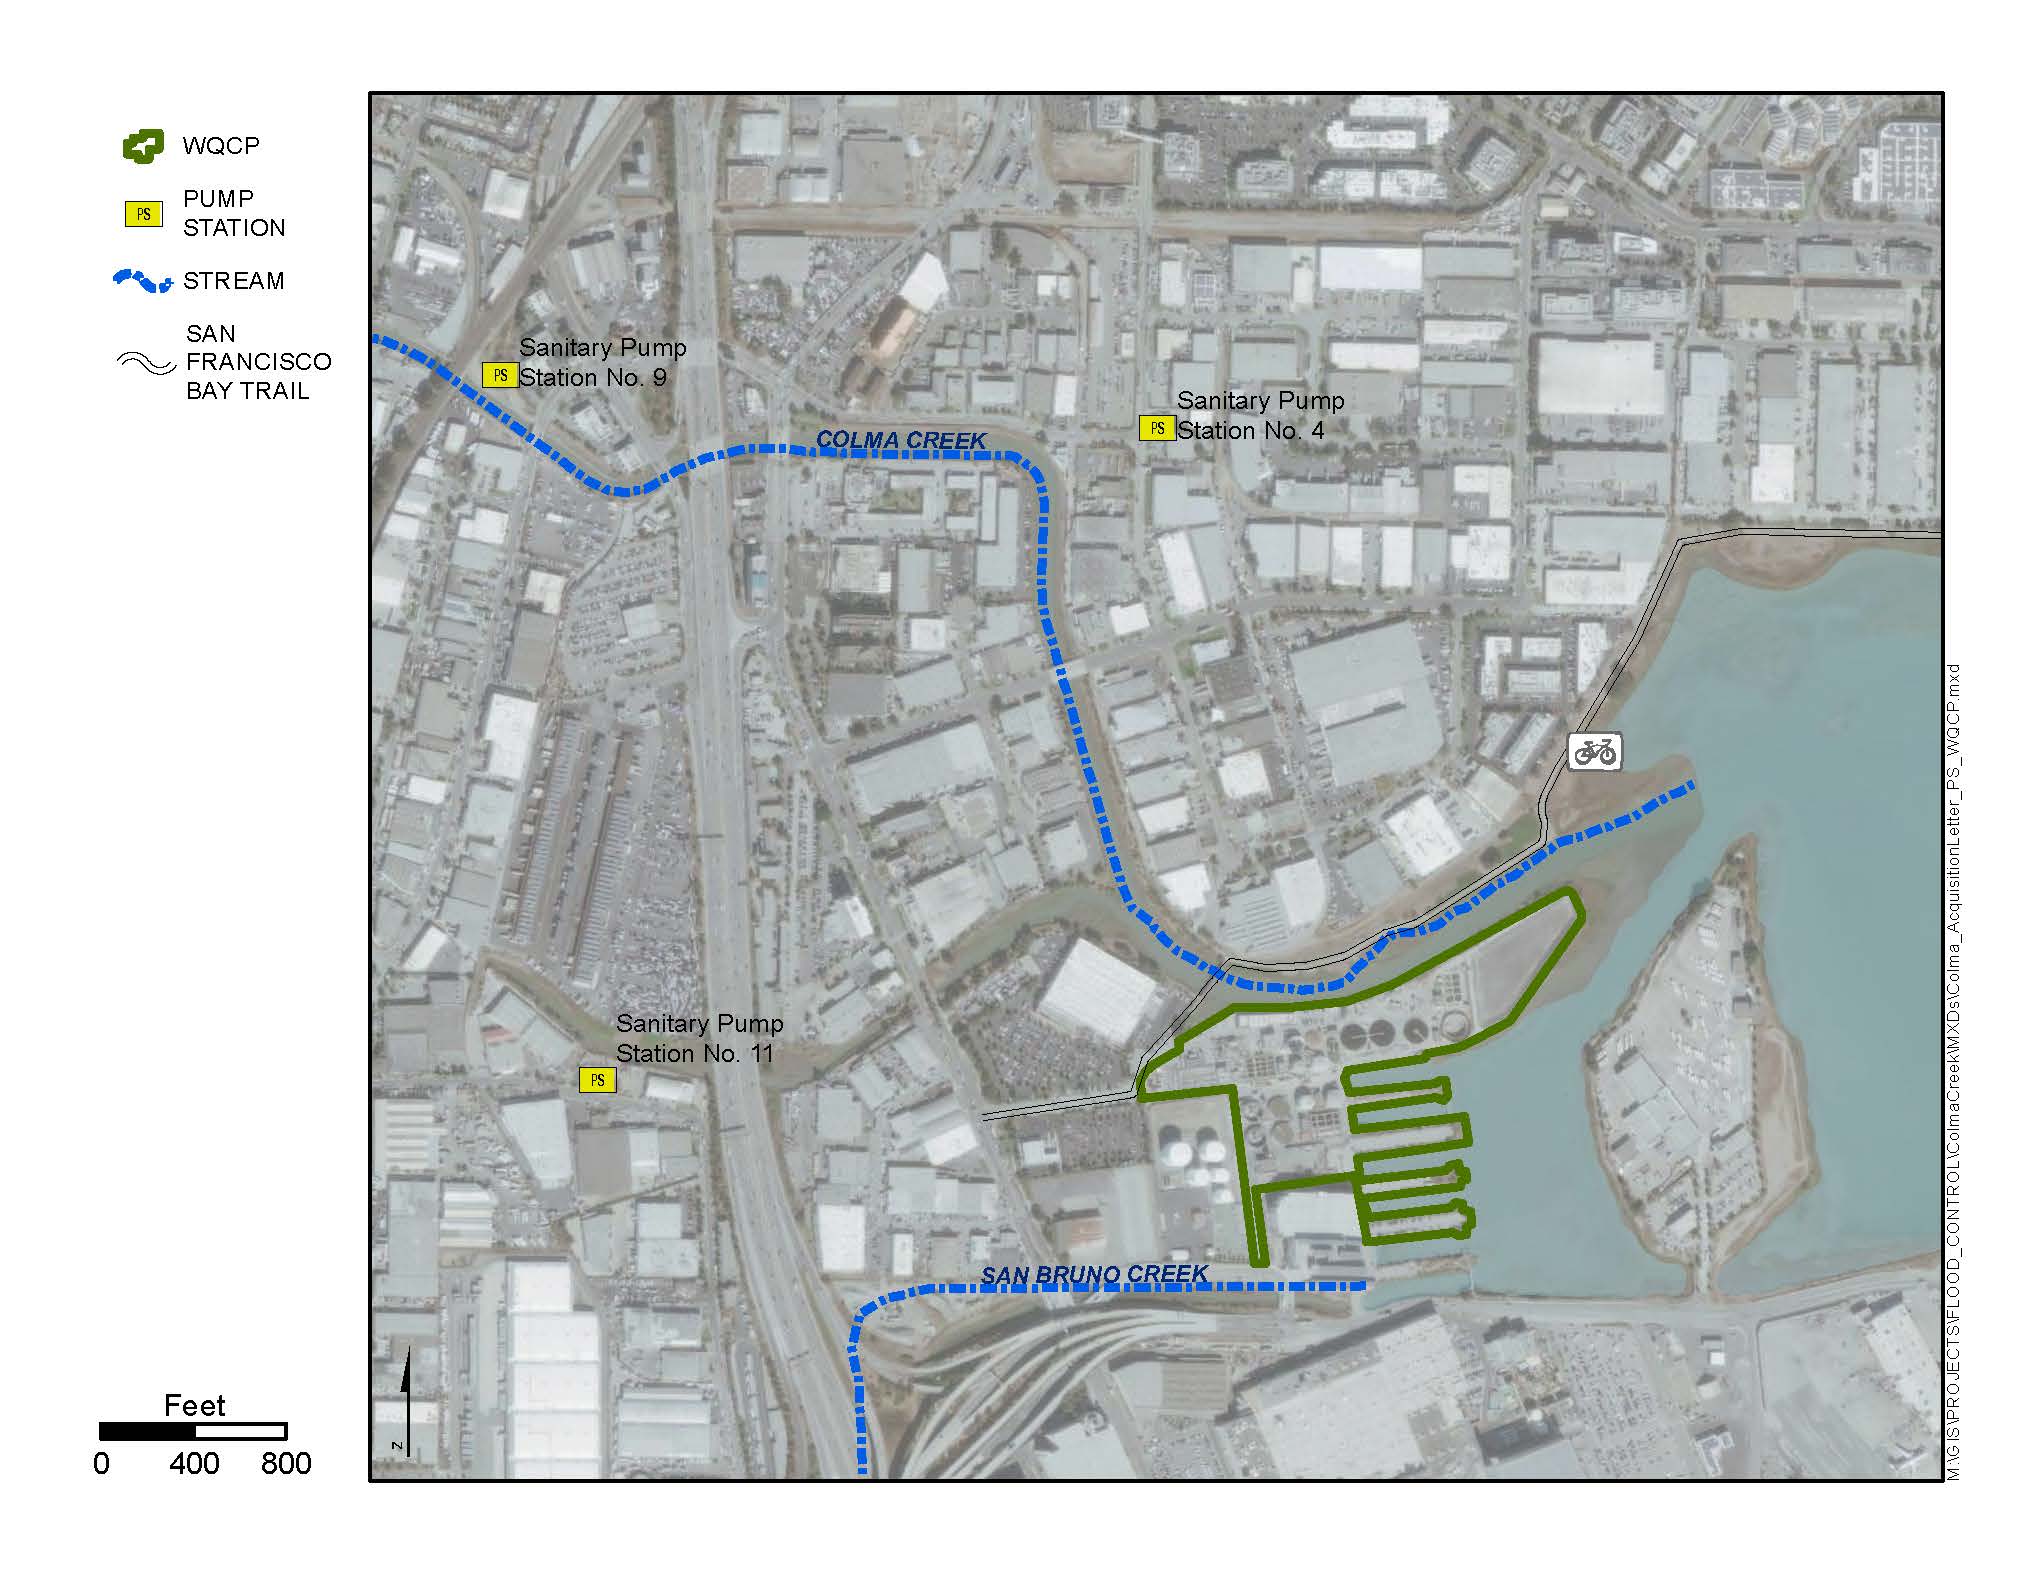 General Study Area Map of Colma Creek and Plant